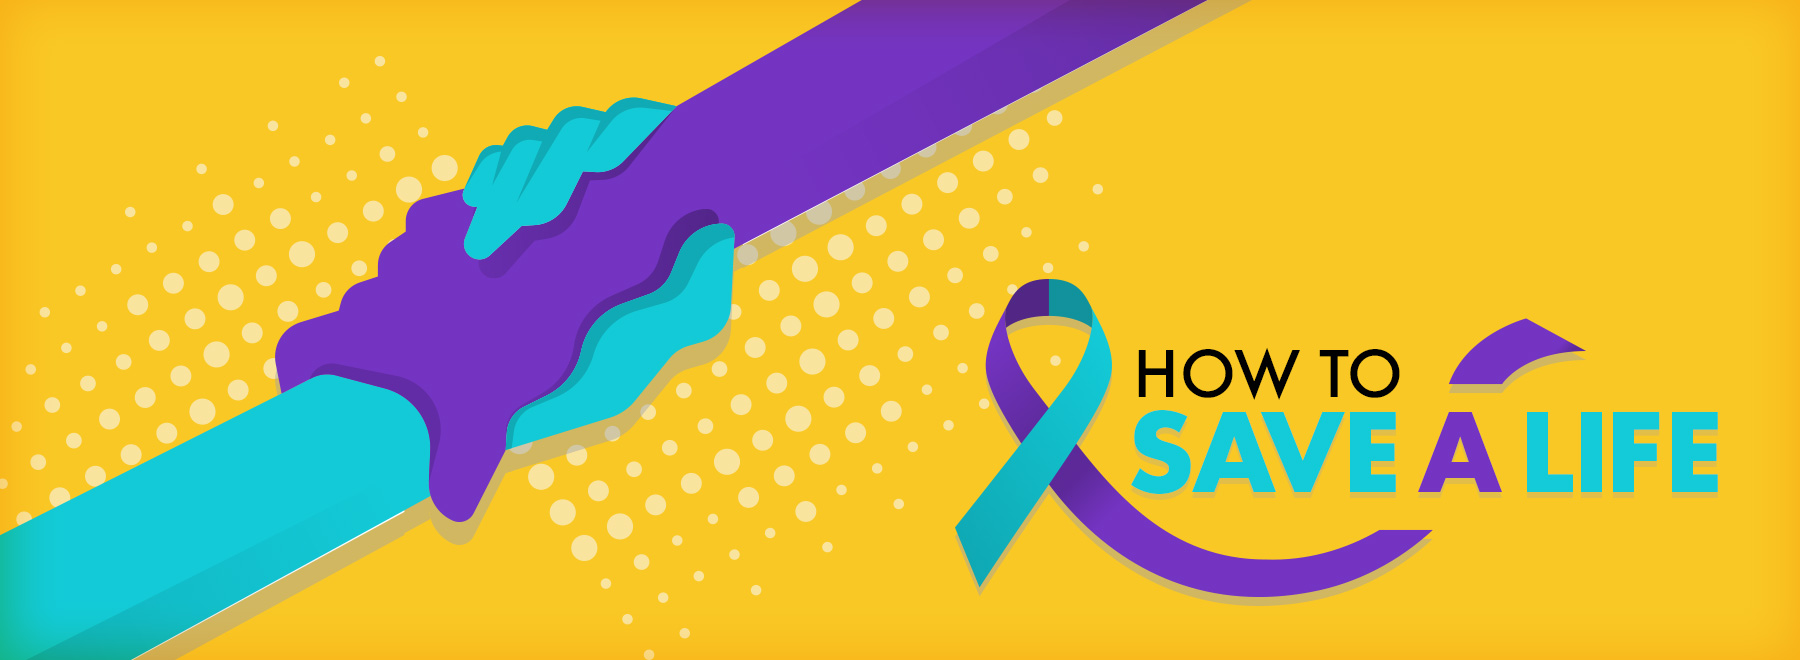 Illustration of purple hand pulling up to save a teal hand in the colors of suicide prevention